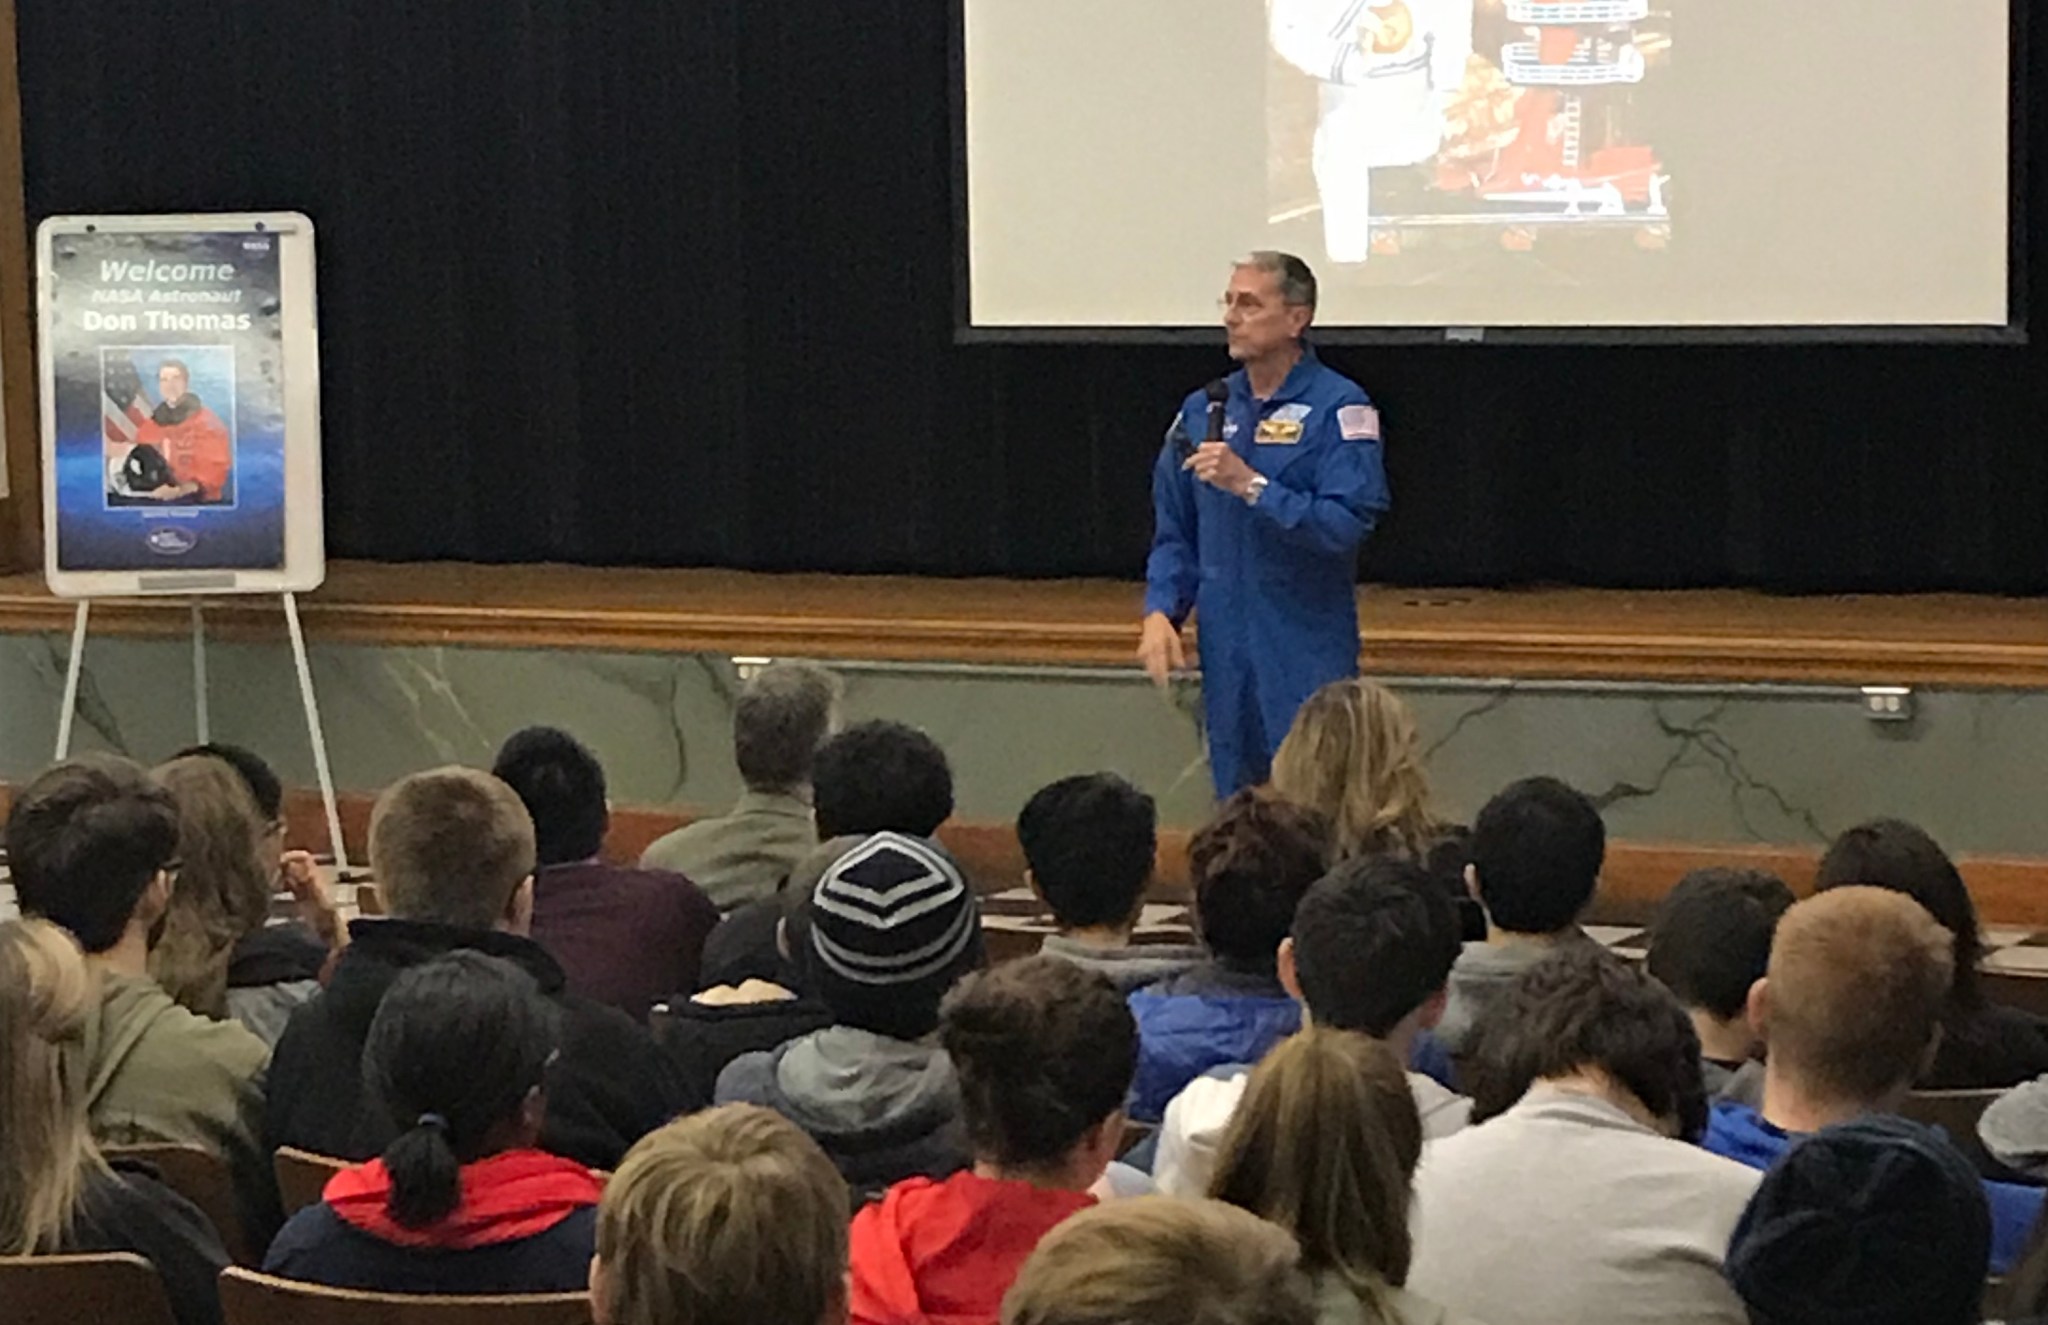 Former NASA astronaut Don Thomas speaks to a group of students at the Oklahoma School of Science and Mathematics.